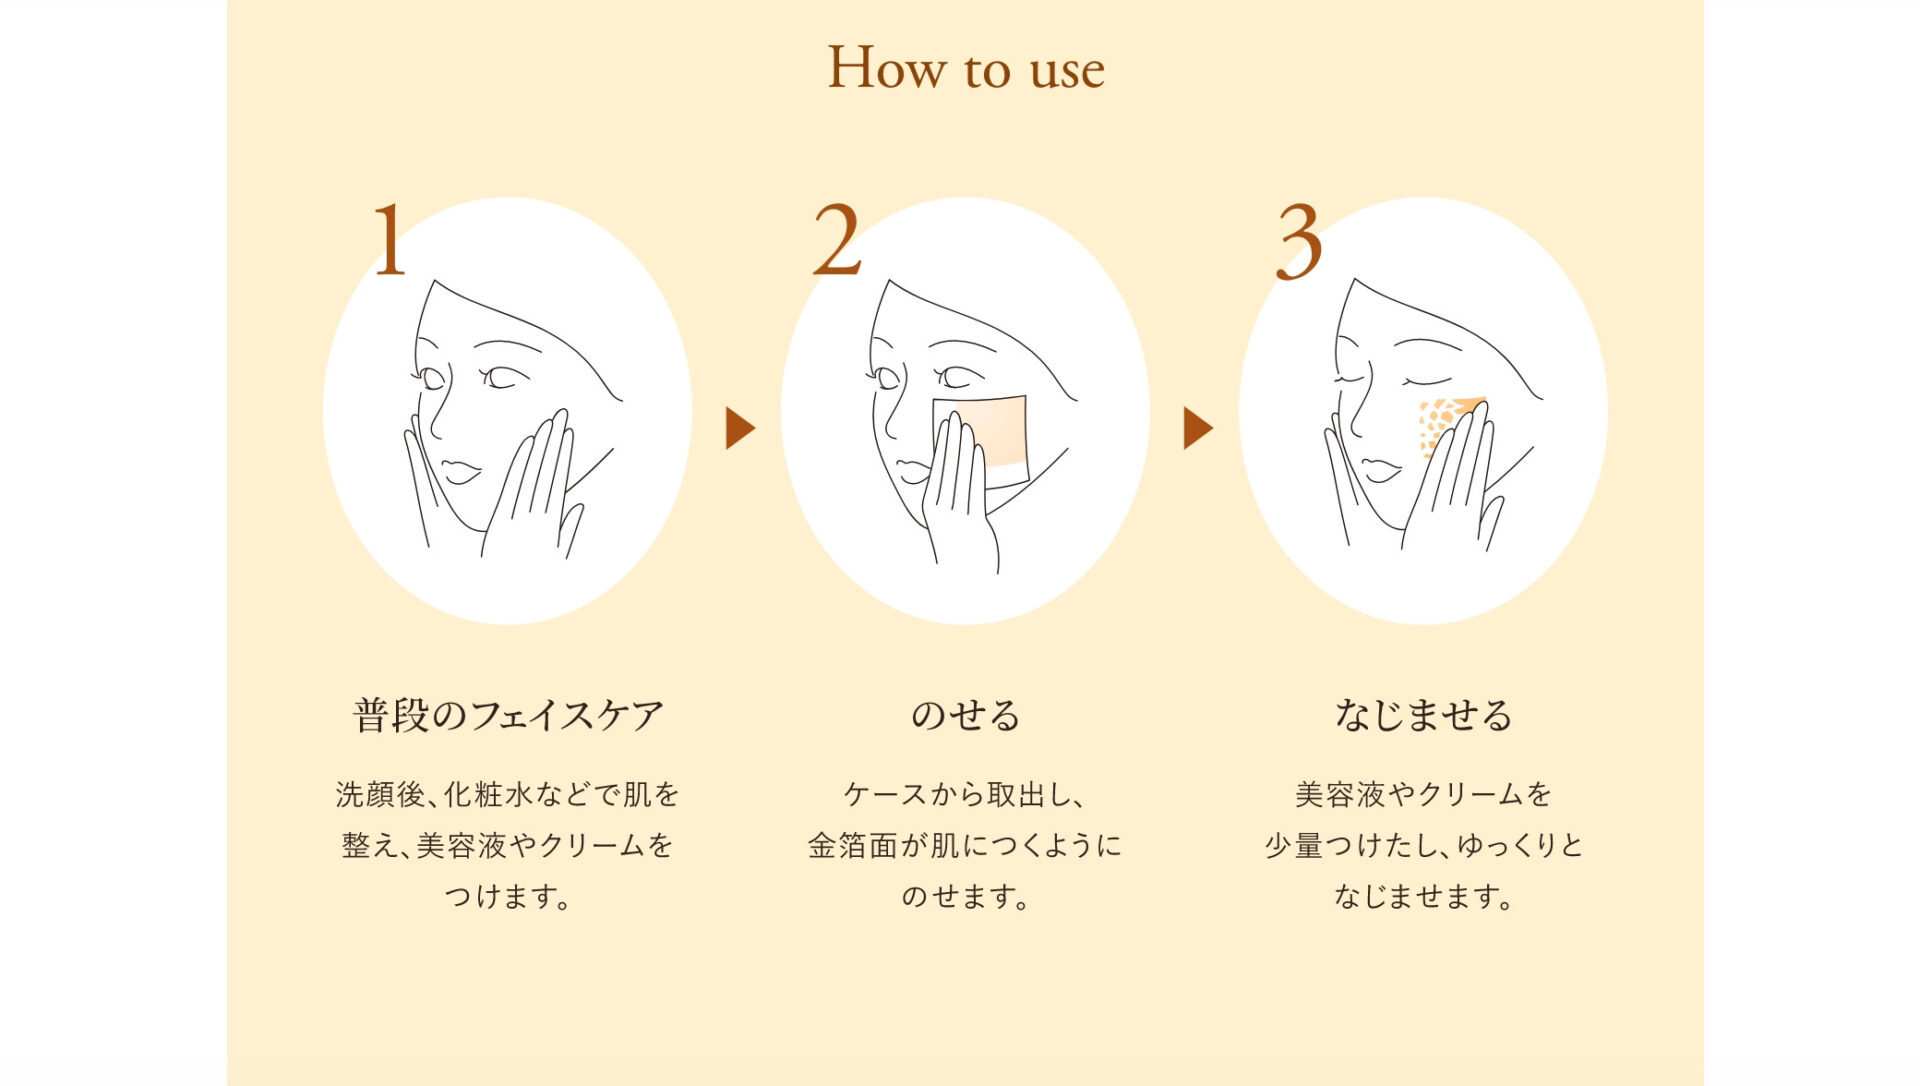 COSMETIC GOLD LEAF Facial Mask 1枚入 3個セット | 箔座オンライン